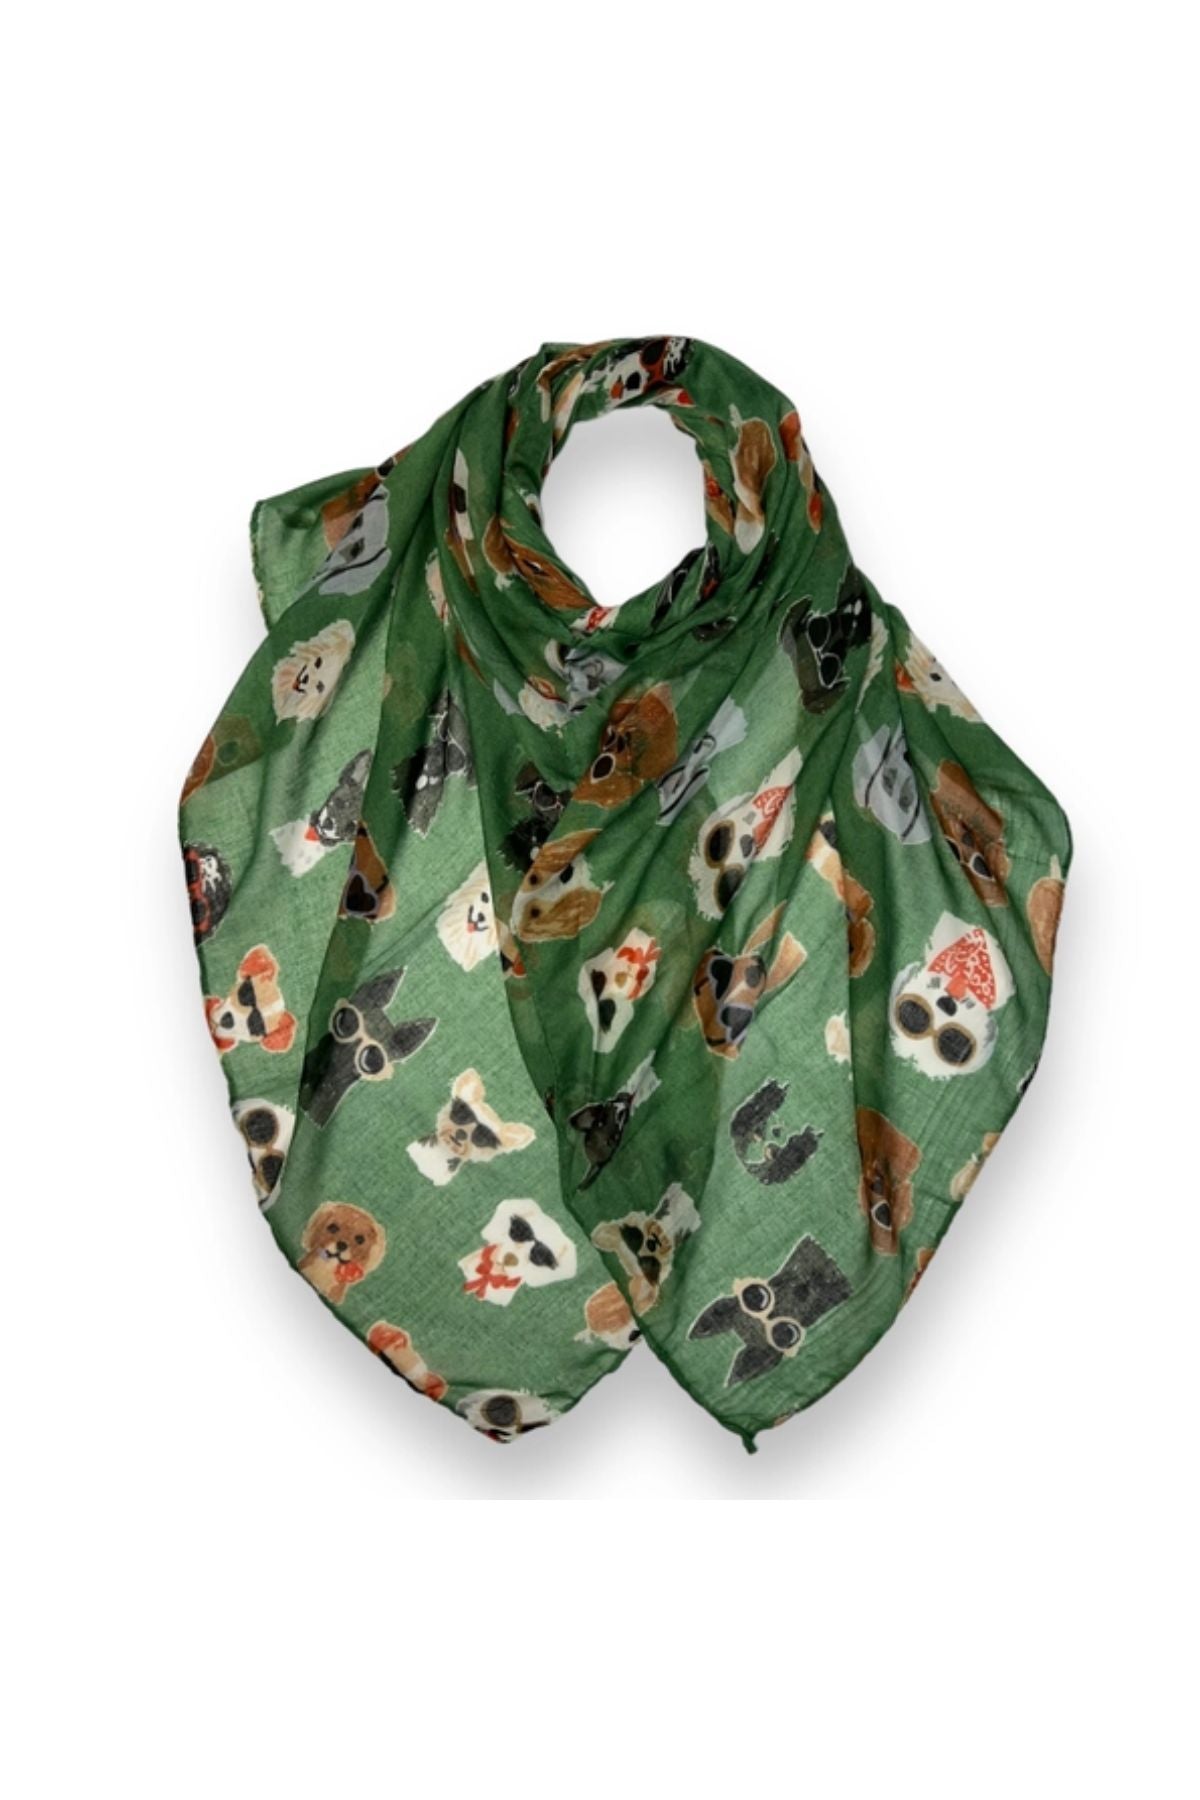 Green dog with sunglasses scarf